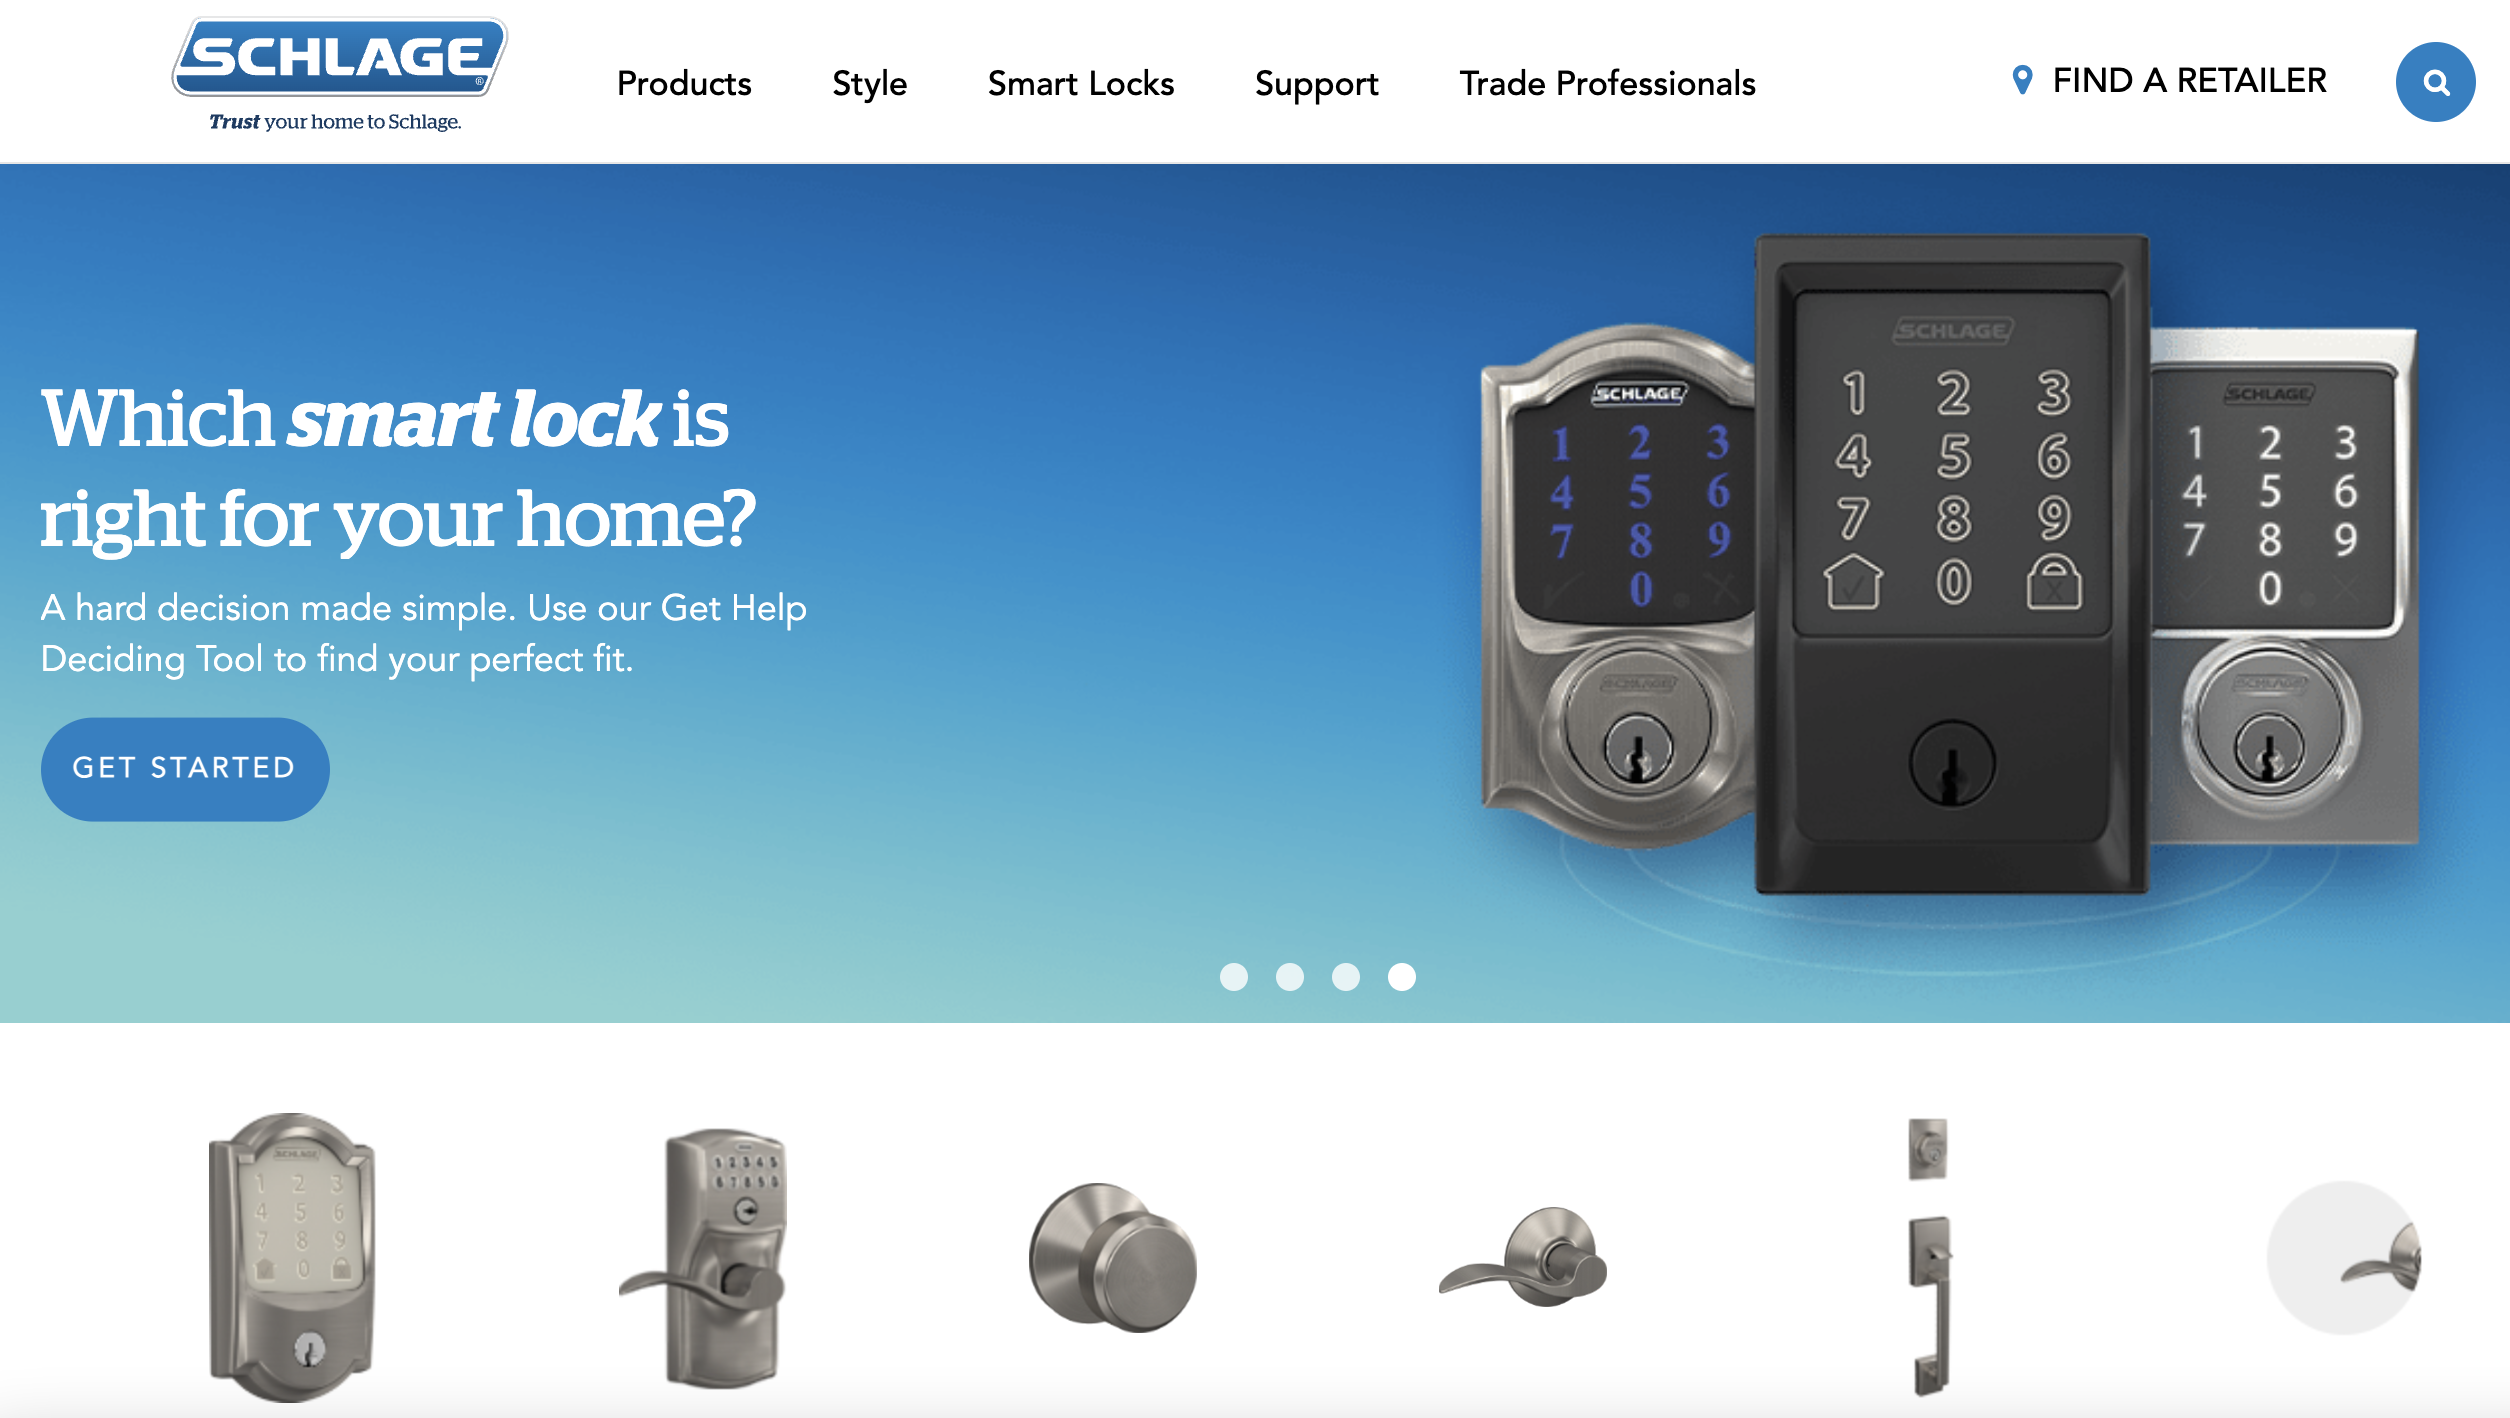 Schlage locks can be used for seamless keyless entry into homes